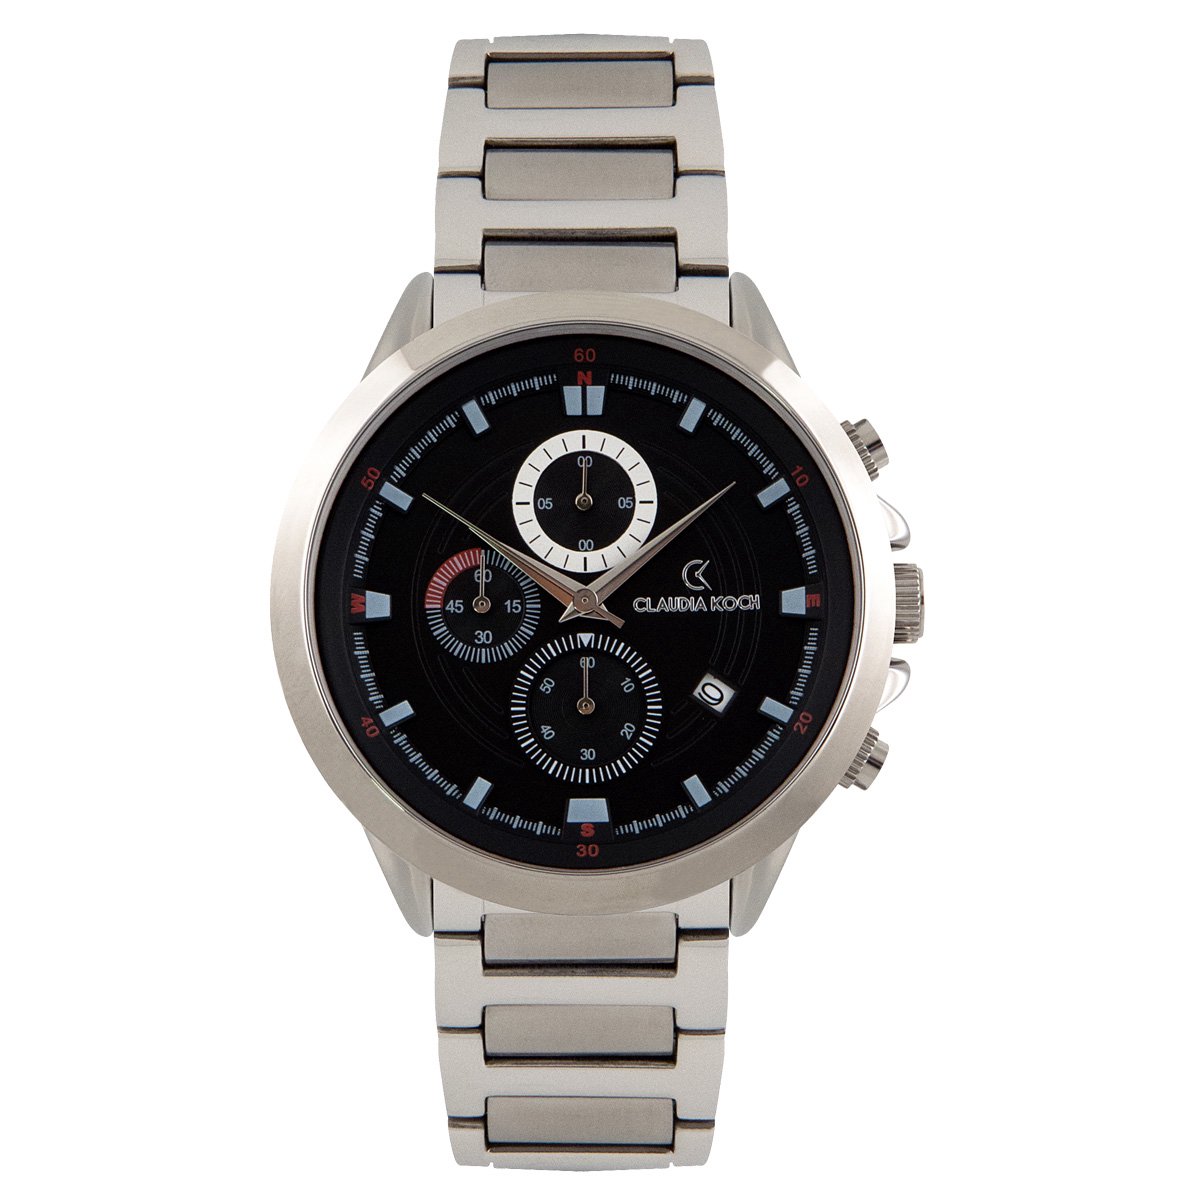 ClaudiaKoch CK 4315 Silver with Black Analog Chronograph Stainless Steel